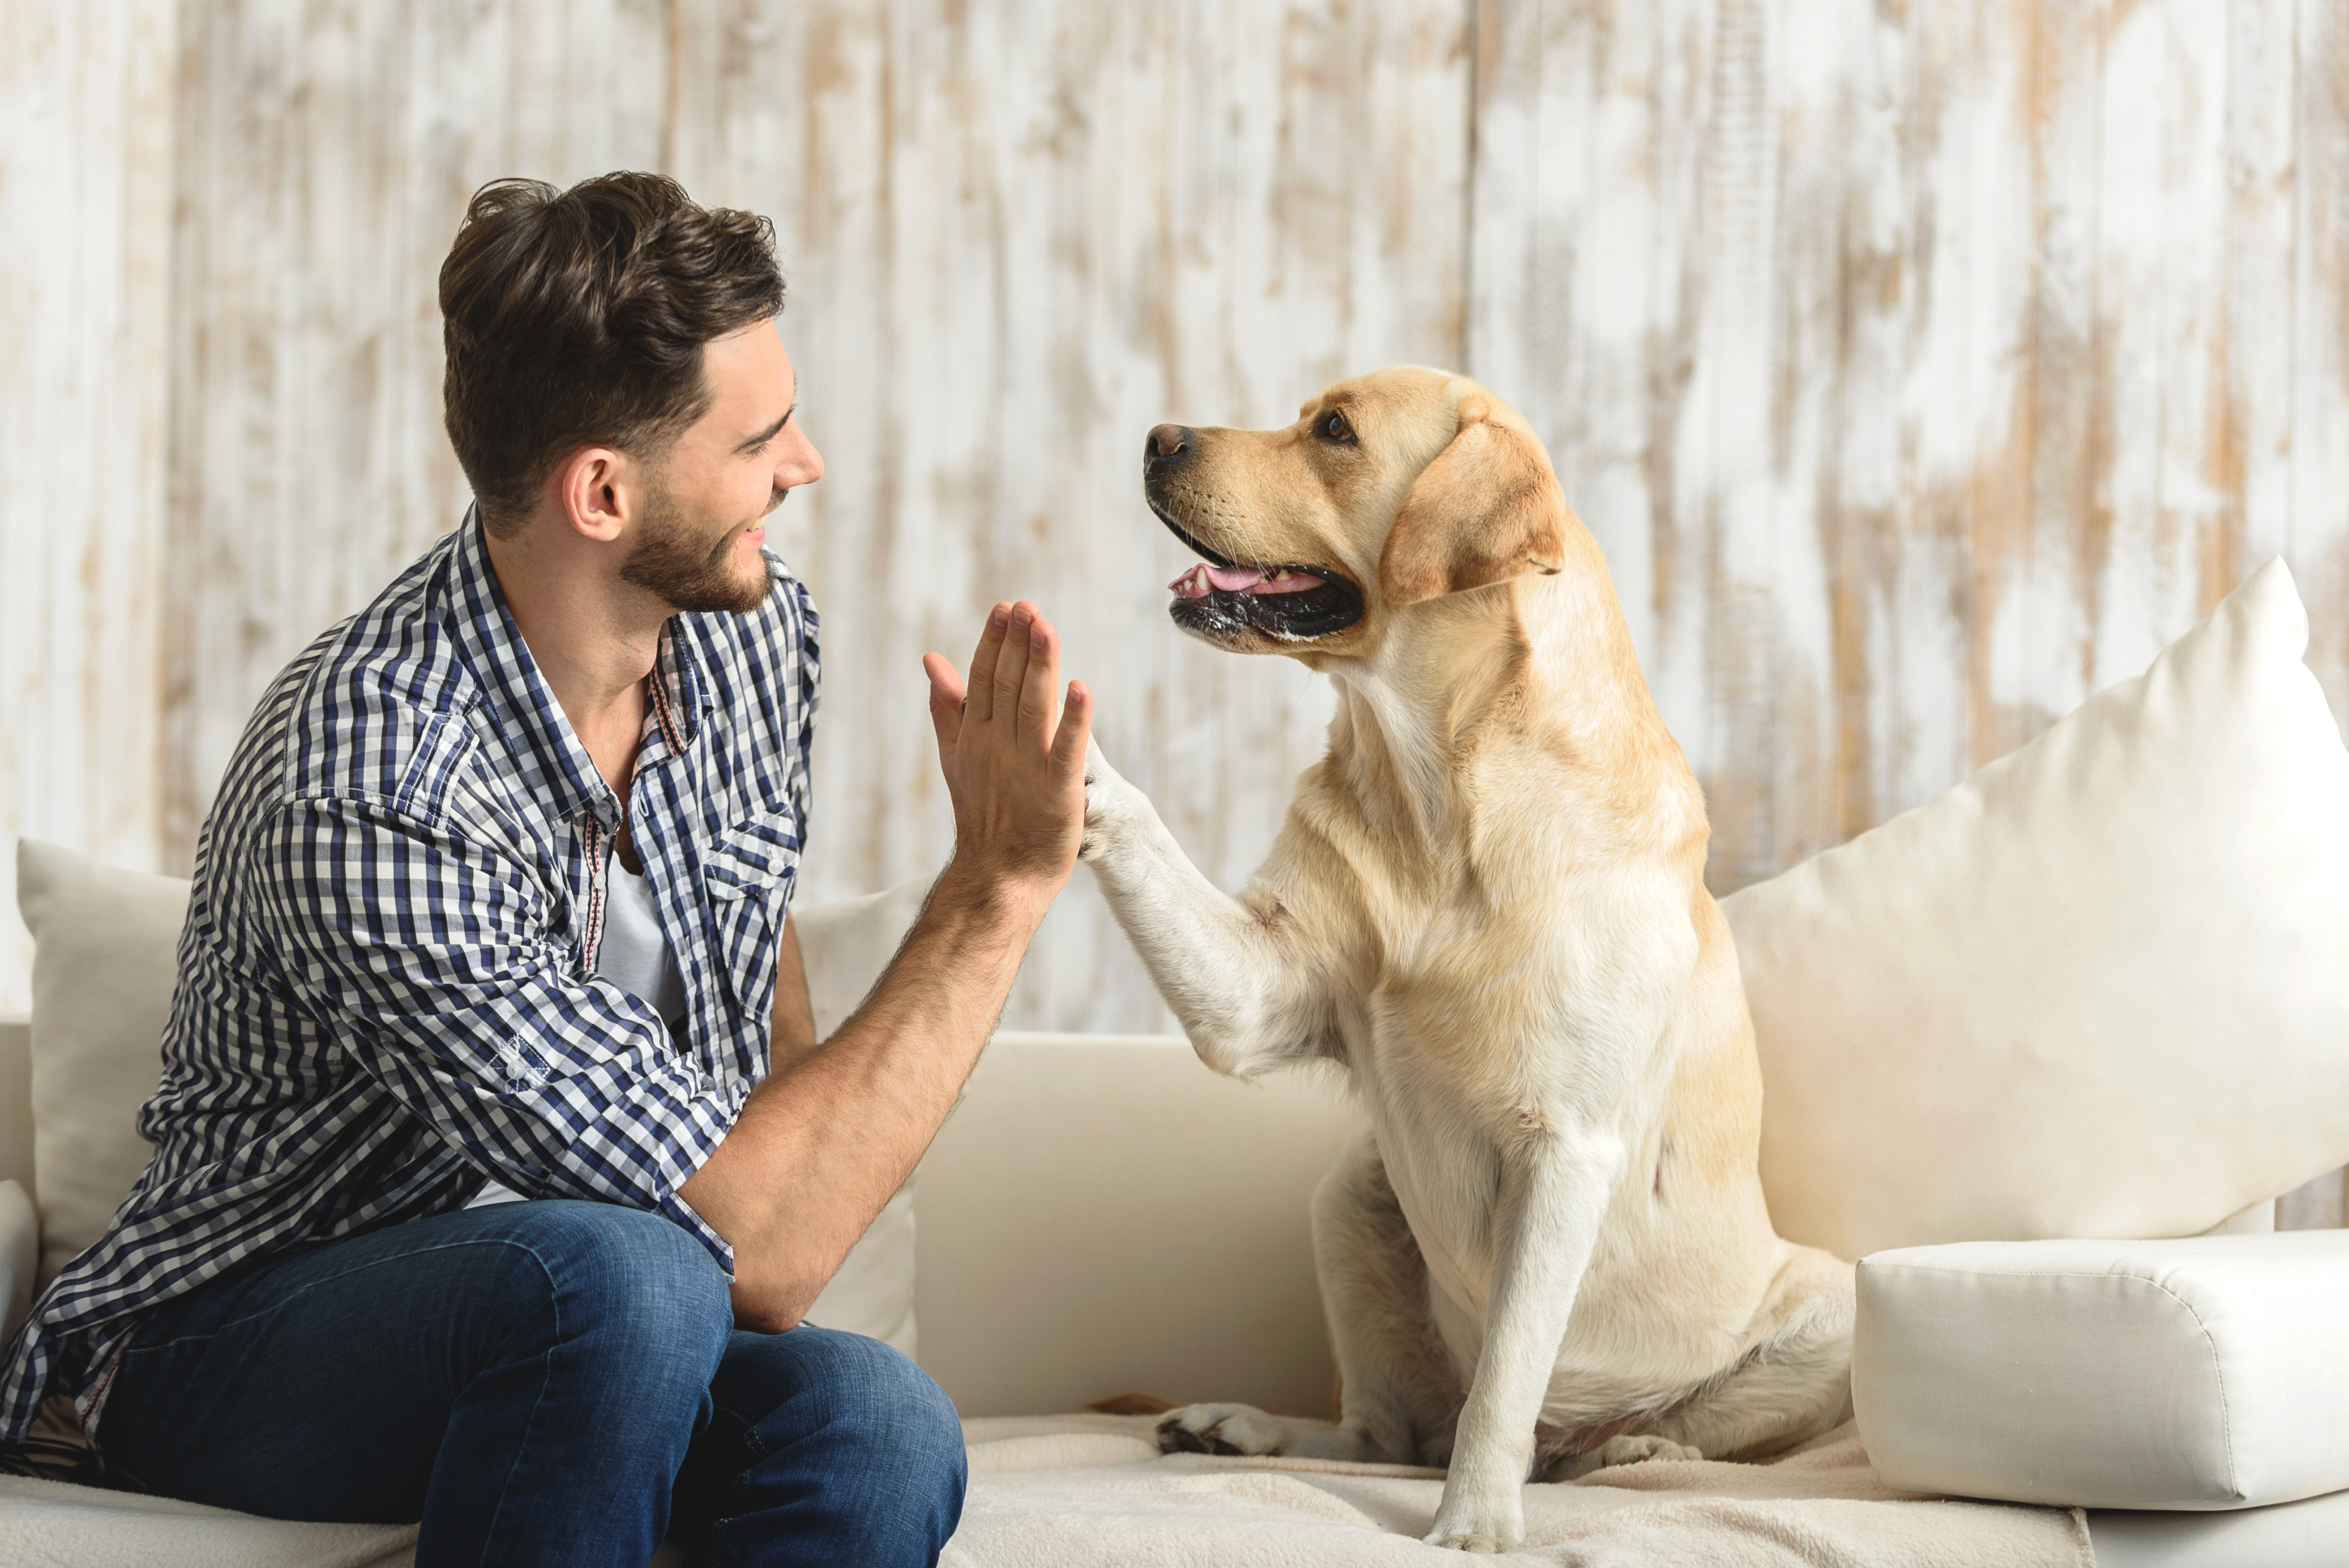 Man and his dog sitting on the couch together high-fiving